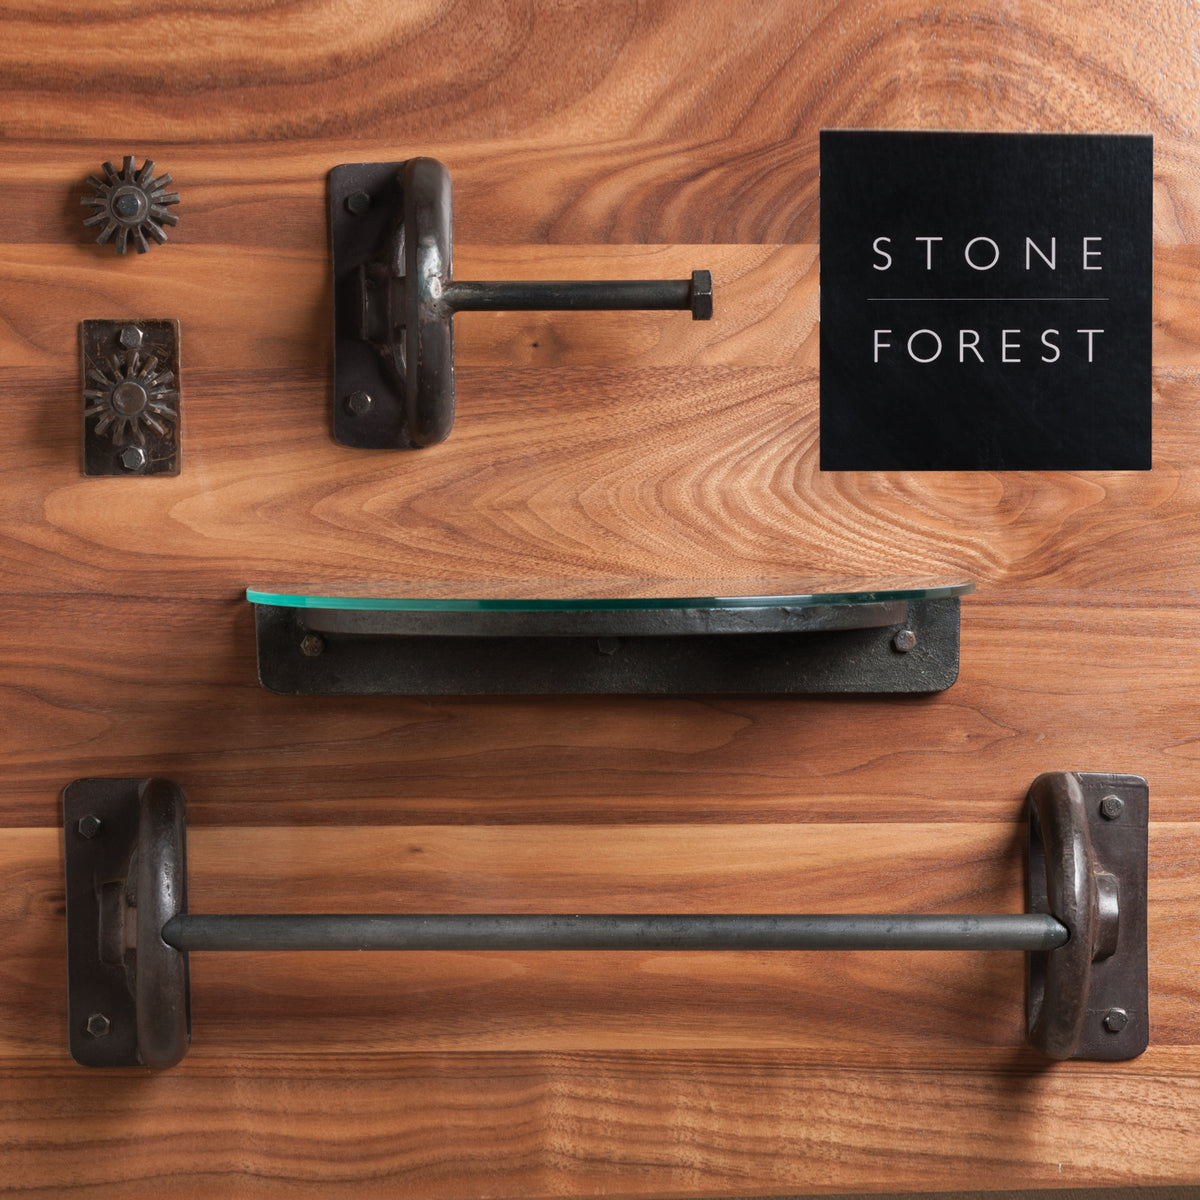 Stone Forest Industrial robe hook, mirror mount, paper holder, shelf and towl bar are all Industrial Collection Accessories forged from iron  image 2 of 11